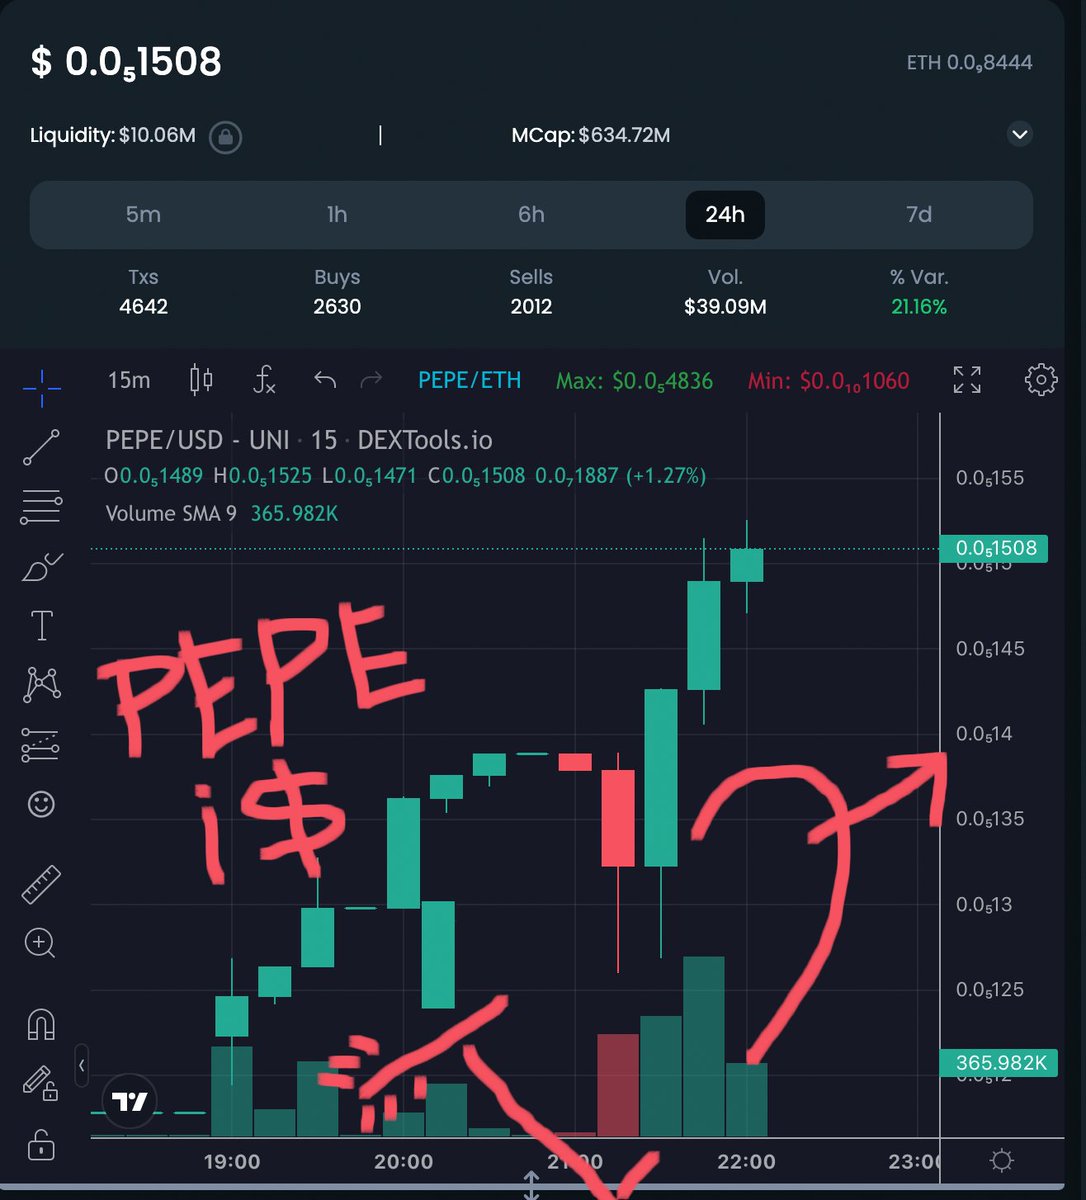 @coinbase @CoinbaseCloud @BuildOnBase @tokenproof @Forum3_ @belikewater893 NO COMMENT! #PEPEISLOVE 💚🐸